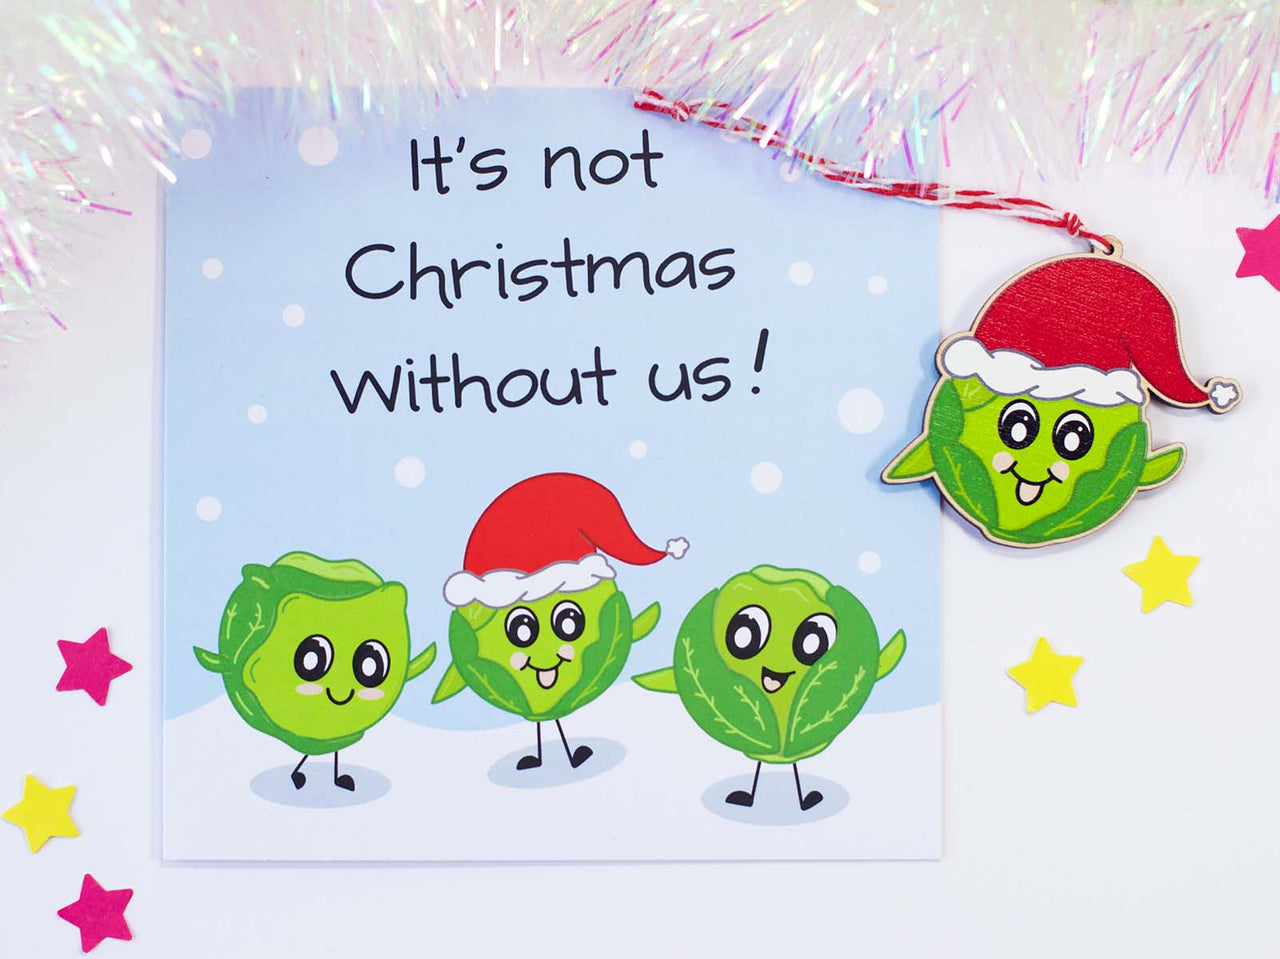 Christmas Card and Christmas Decoration, ornament. Card has 3 happy sprouts, one wearing a santa hat. Words say It's Not Christmas without us! Matching Christmas wooden hanging decoration of the sprout with a Santa hat